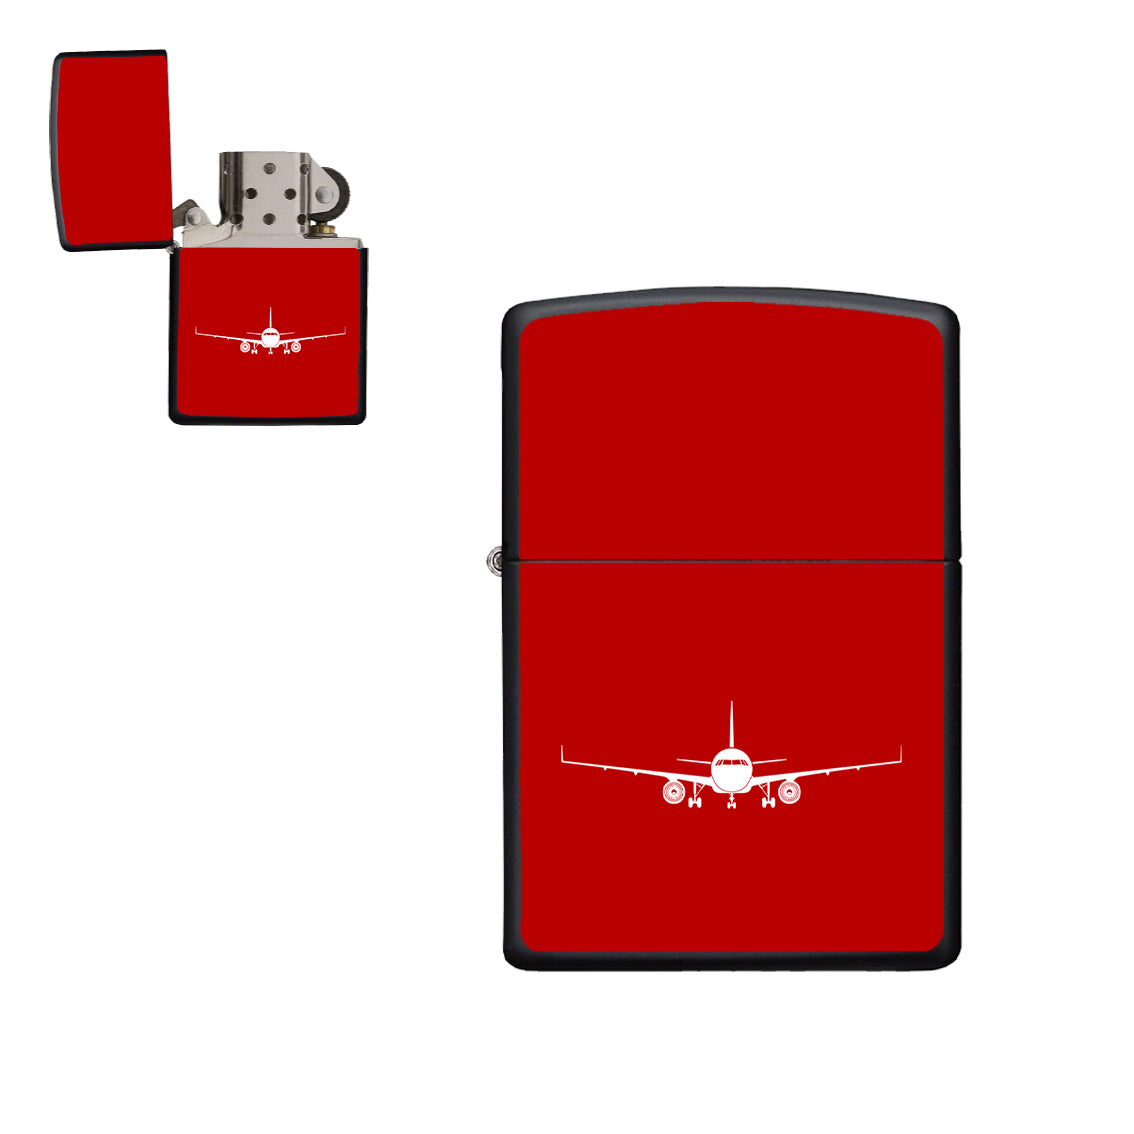 Airbus A320 Silhouette Designed Metal Lighters